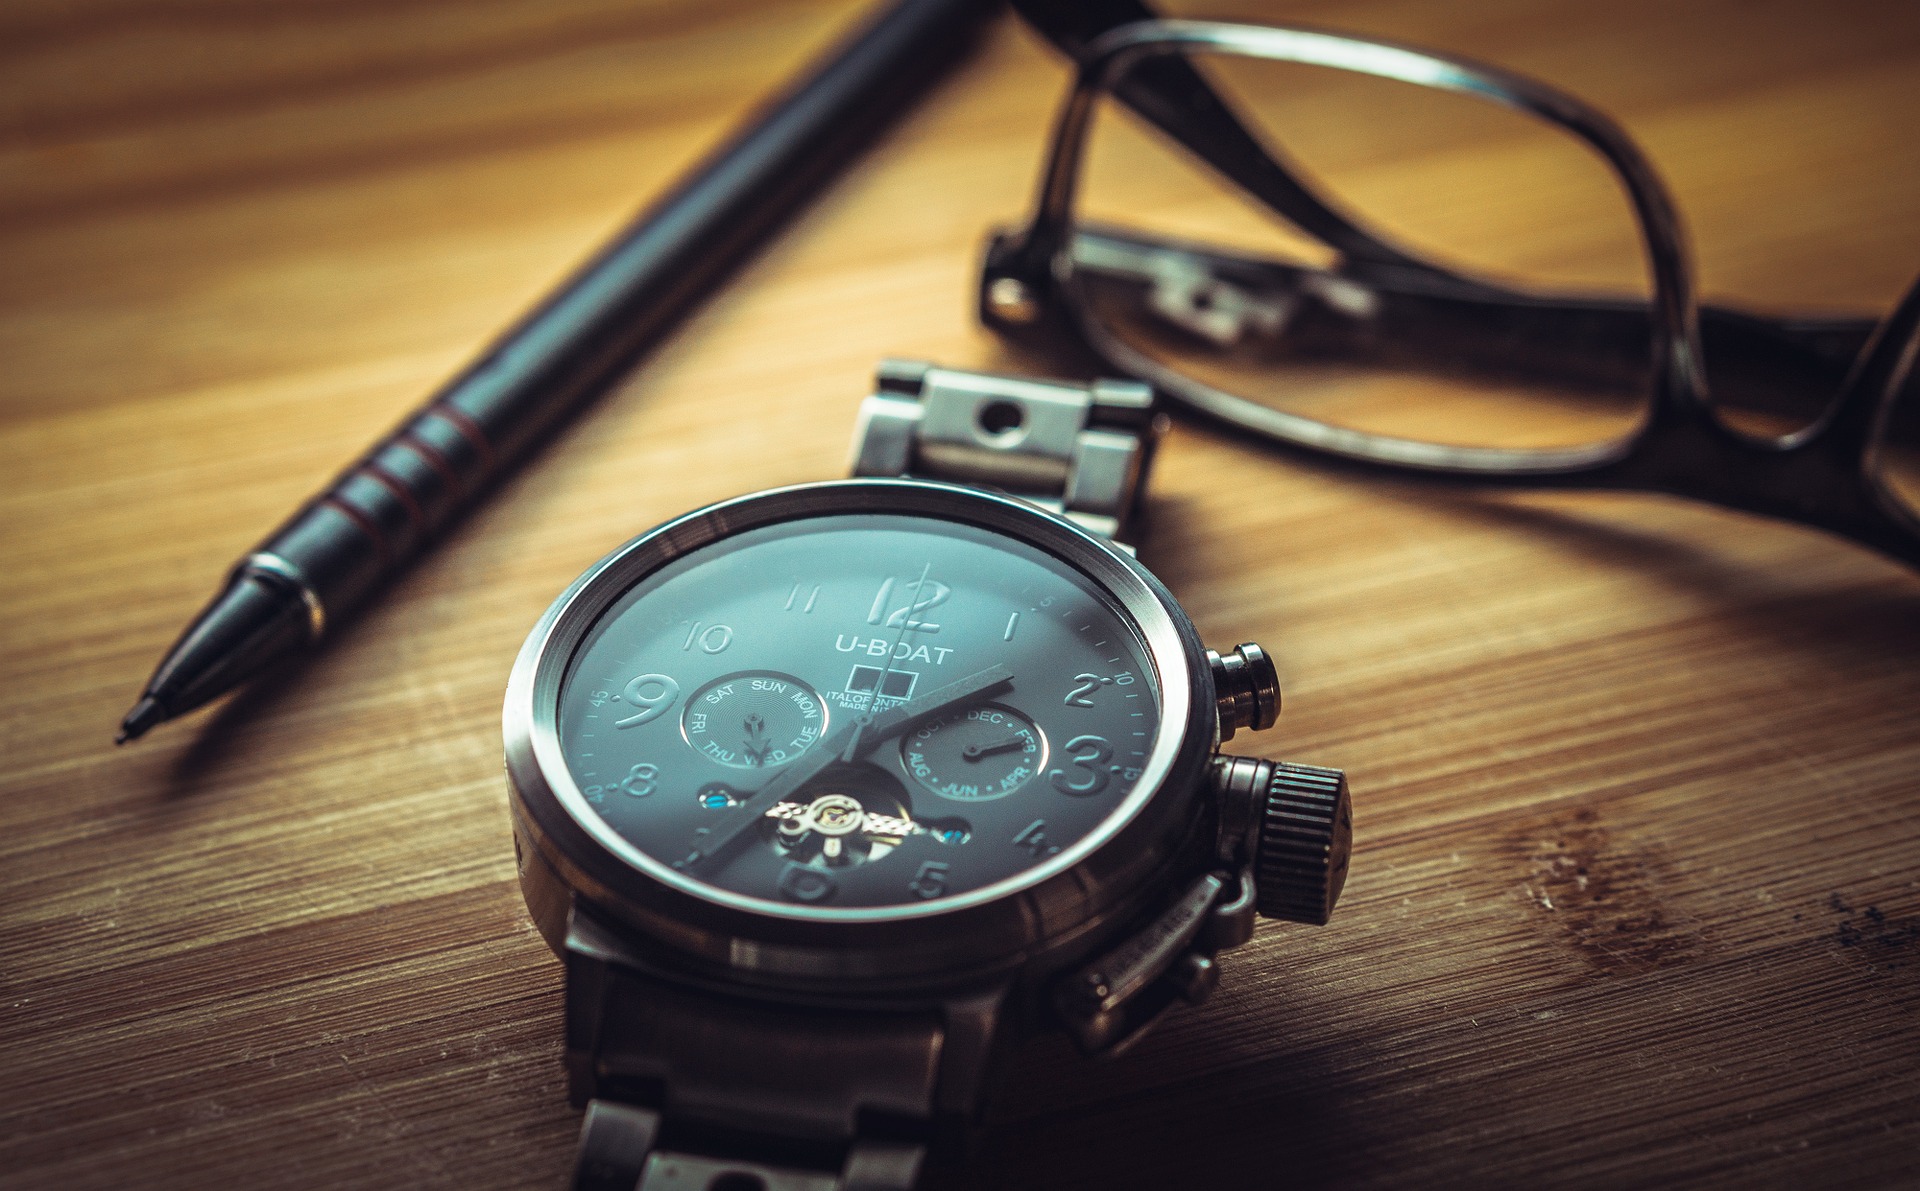 Best Survival Watch Buying Guide - Things you need to look out for